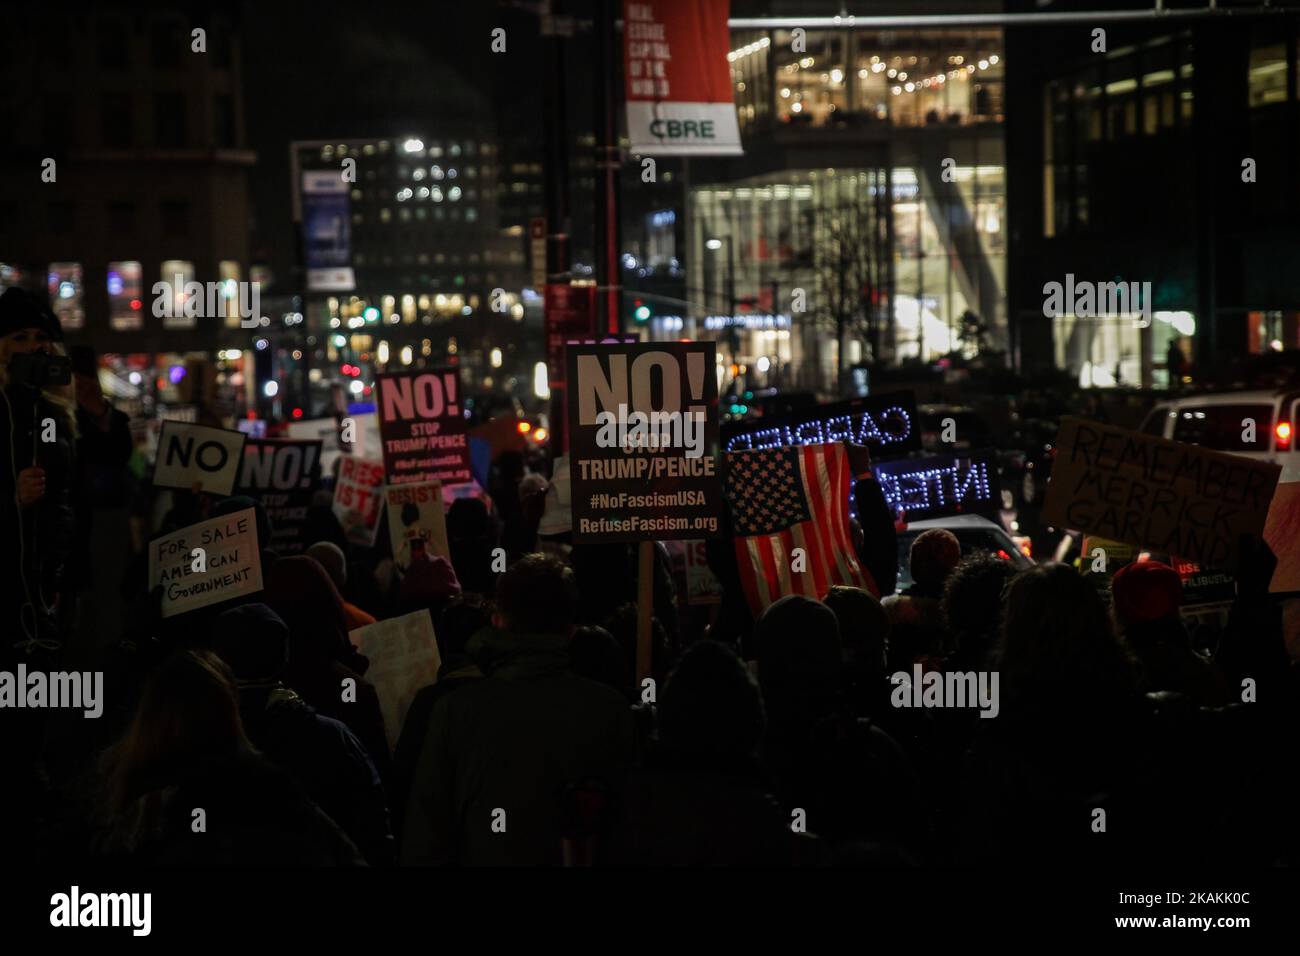 NYCC is protesting due to the recent comments from Donald Trump on rolling back Dodd-Frank and his recent Finanical Executive Order written by former Goldman employee Gary Cohn at Liberty St near Federal Reserve Bank of New York, NY, USA, 7 february 2017. Last week President Donald Trump announced he was rolling back #DoddFrank and bringing on Jamie Dimon, CEO of J.P Morgan Chase as an advisor to that rollback. Trump's exact quote was Â“We expect to be cutting a lot out of Dodd-Frank because, frankly, I have so many people, friends of mine, who have nice businesses who canÂ’t borrow money. The Stock Photo